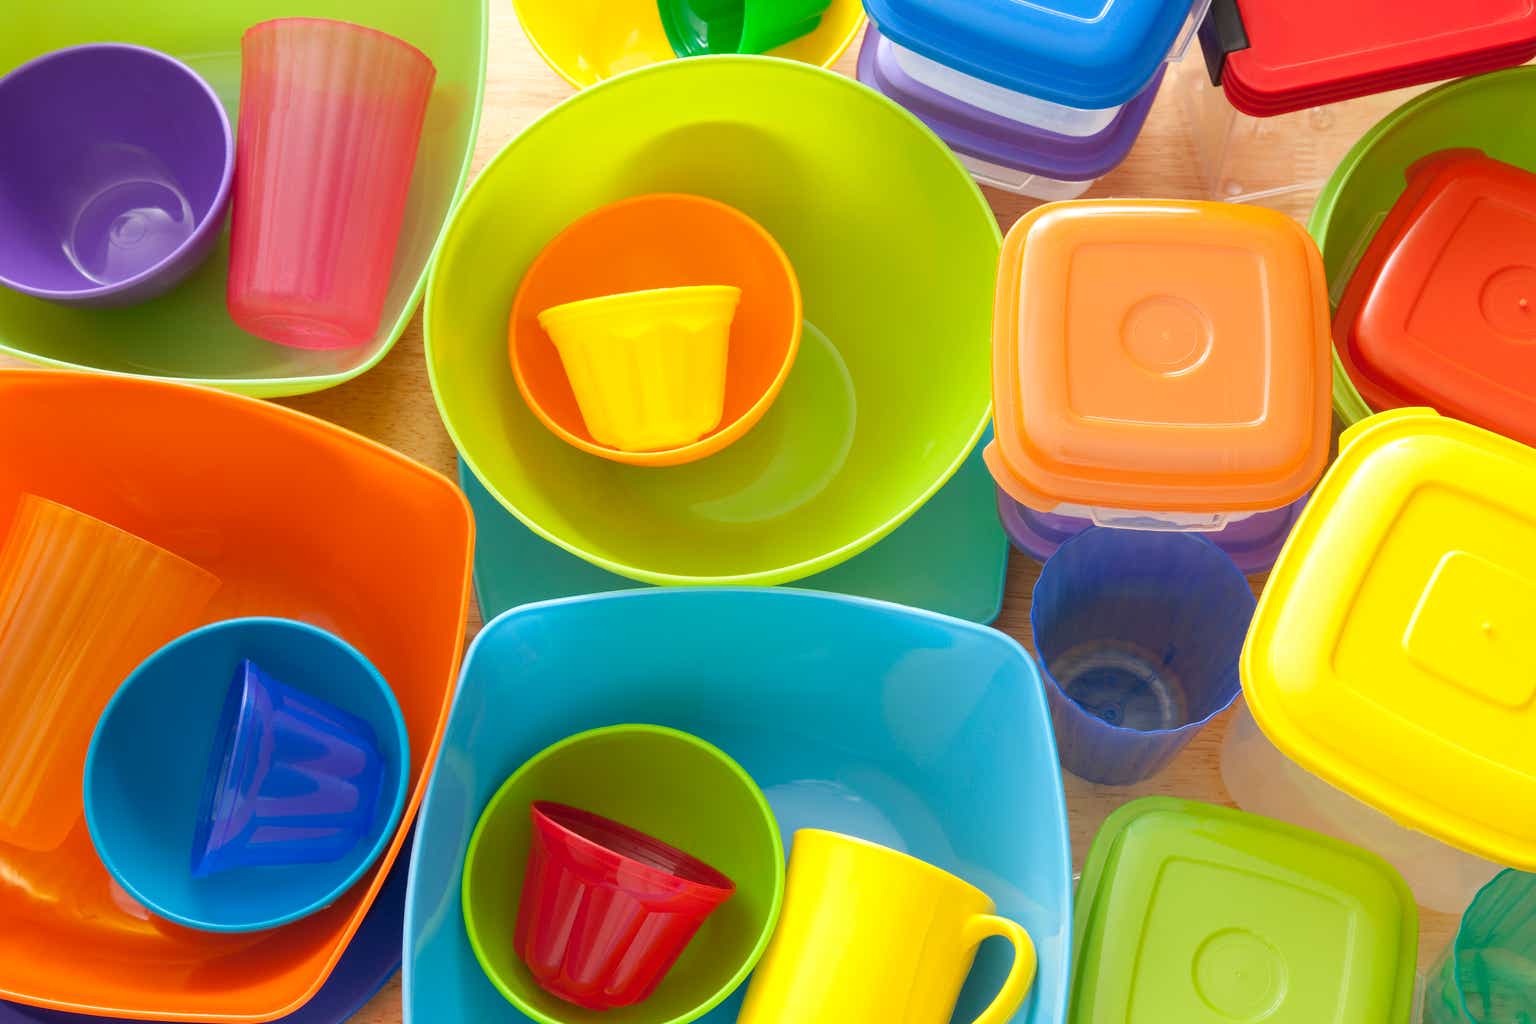 Tupperware warns it could be finished as a business as stocks